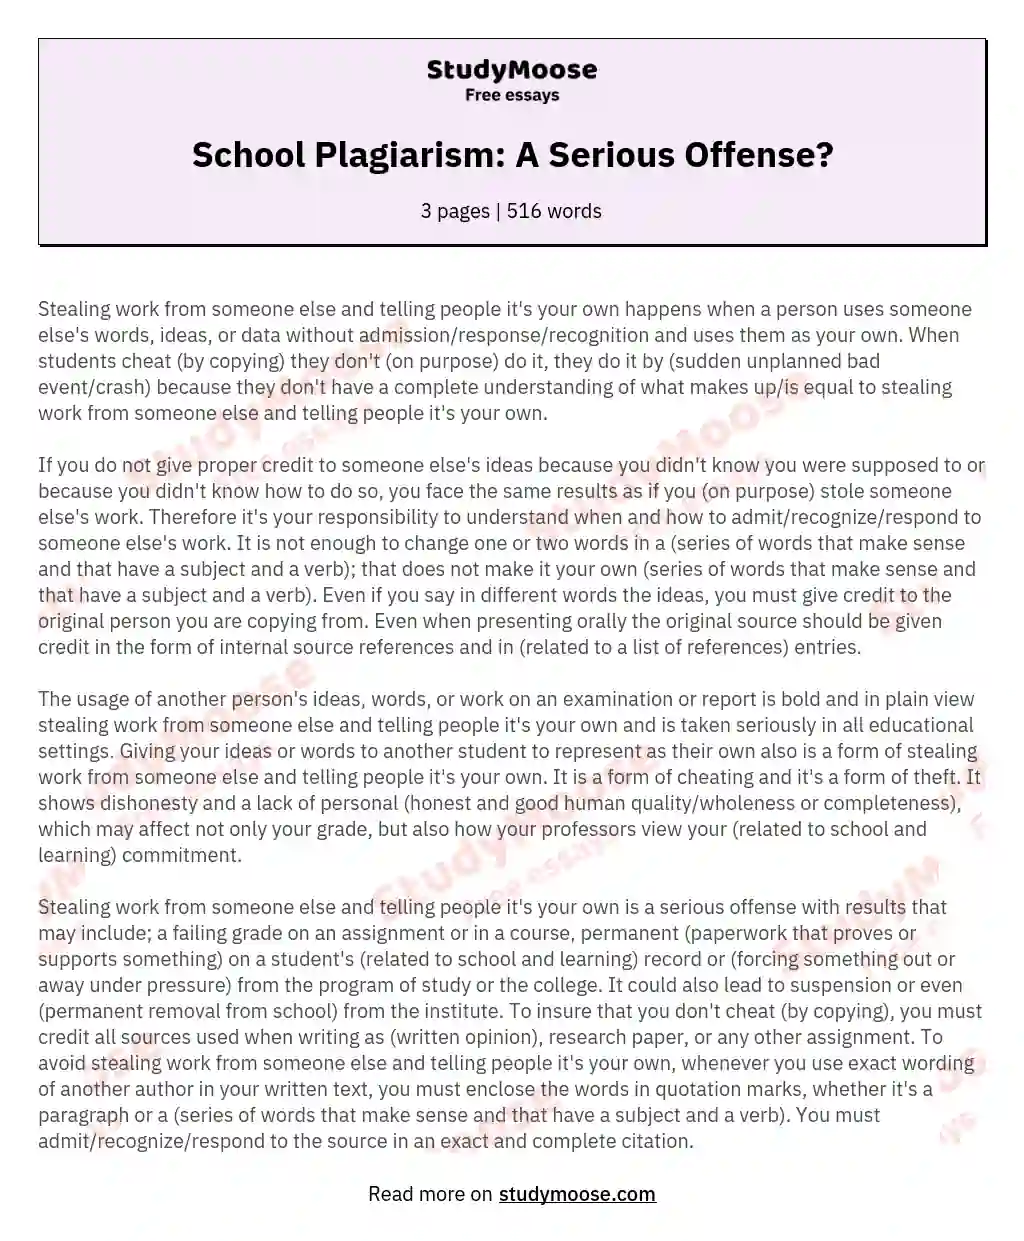 essay about plagiarism is a serious offense